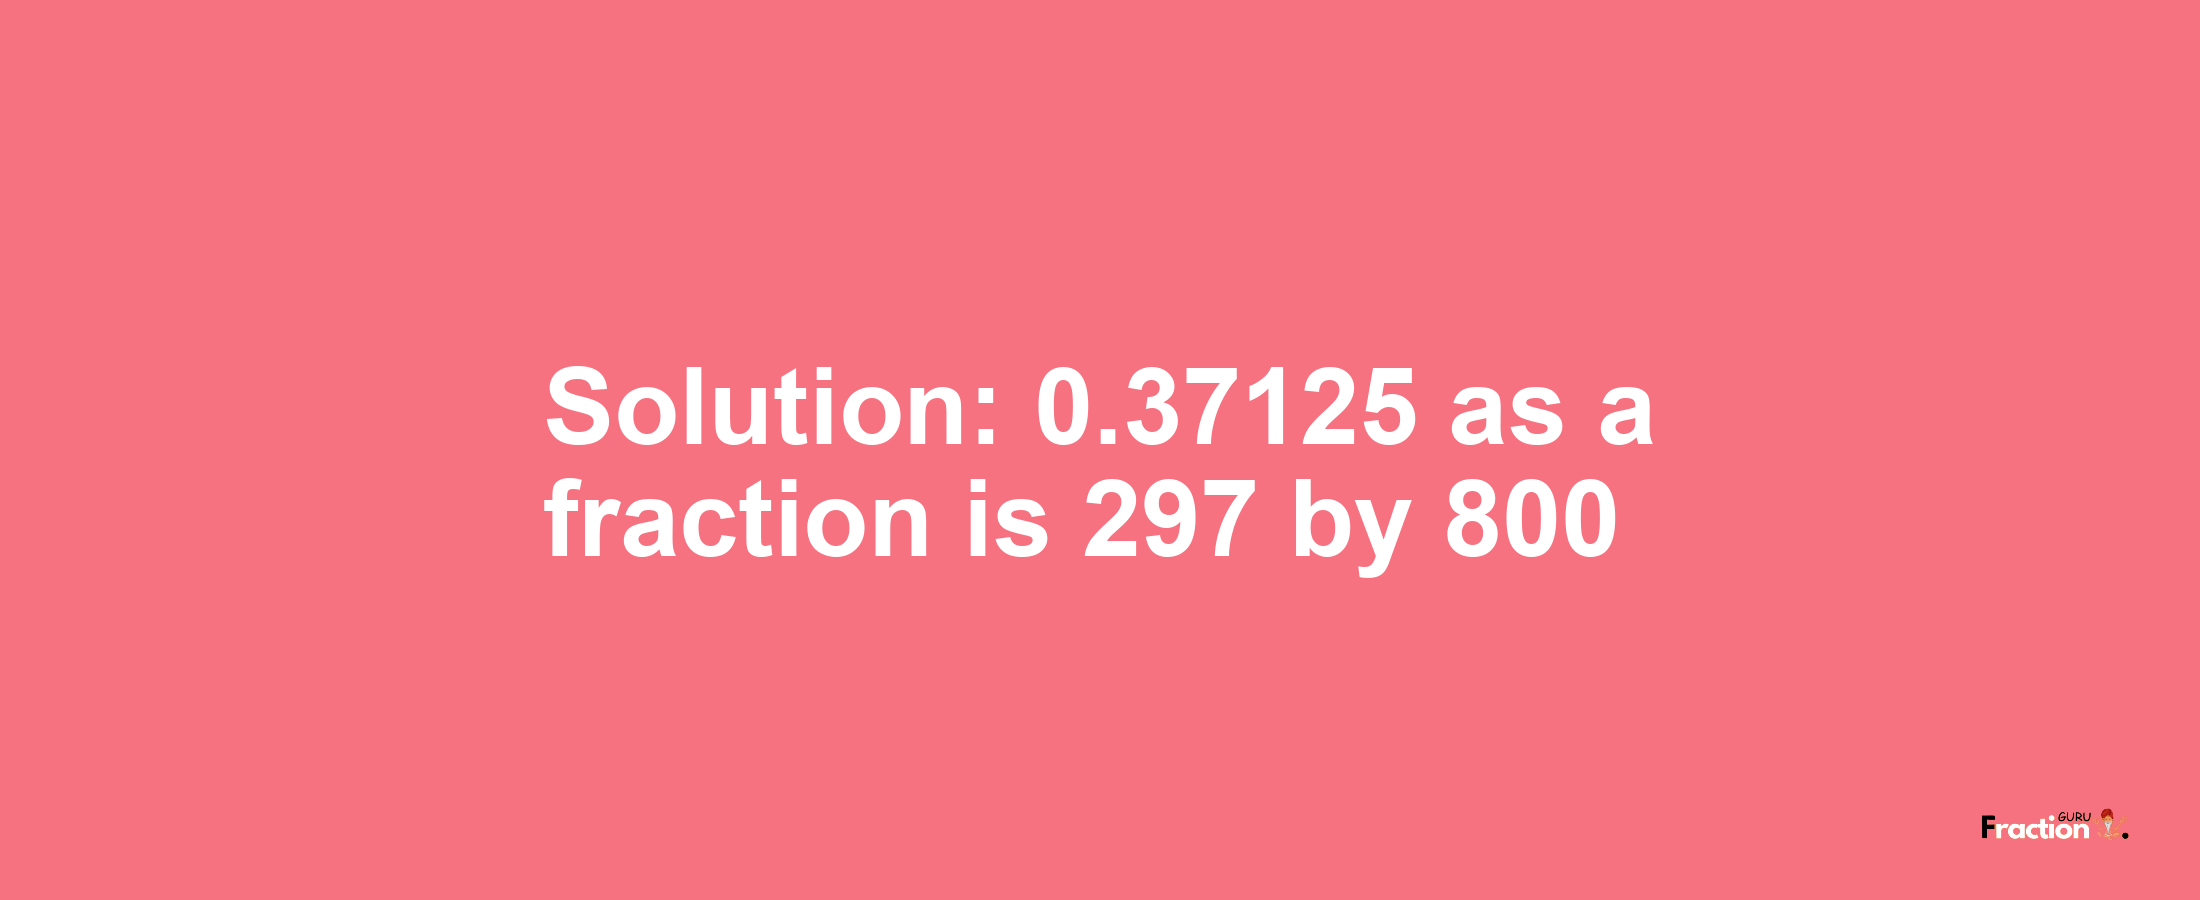 Solution:0.37125 as a fraction is 297/800